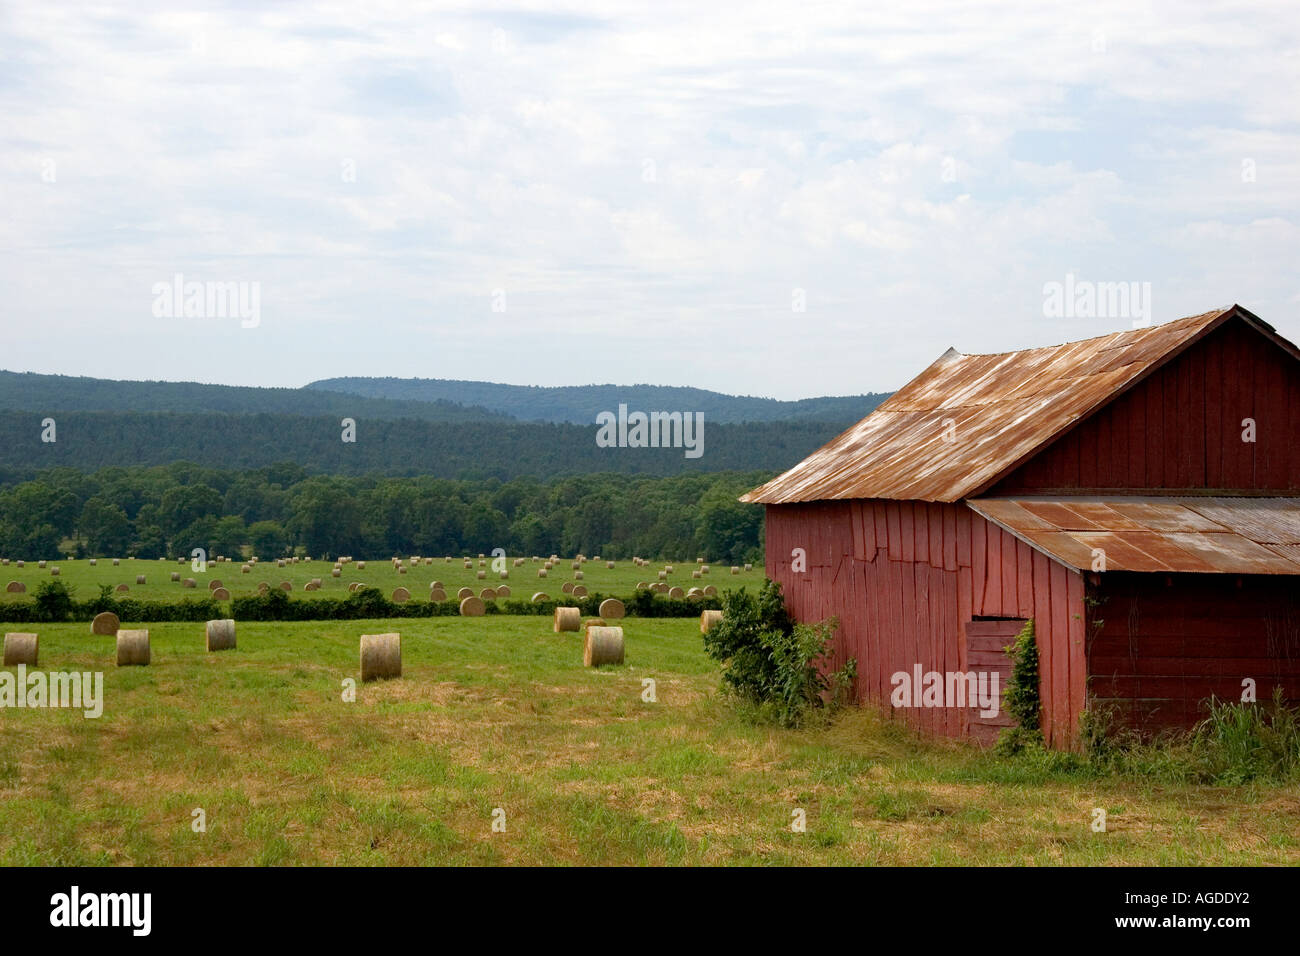 Round hay bales and red barn in northwest Arkansas. Stock Photo